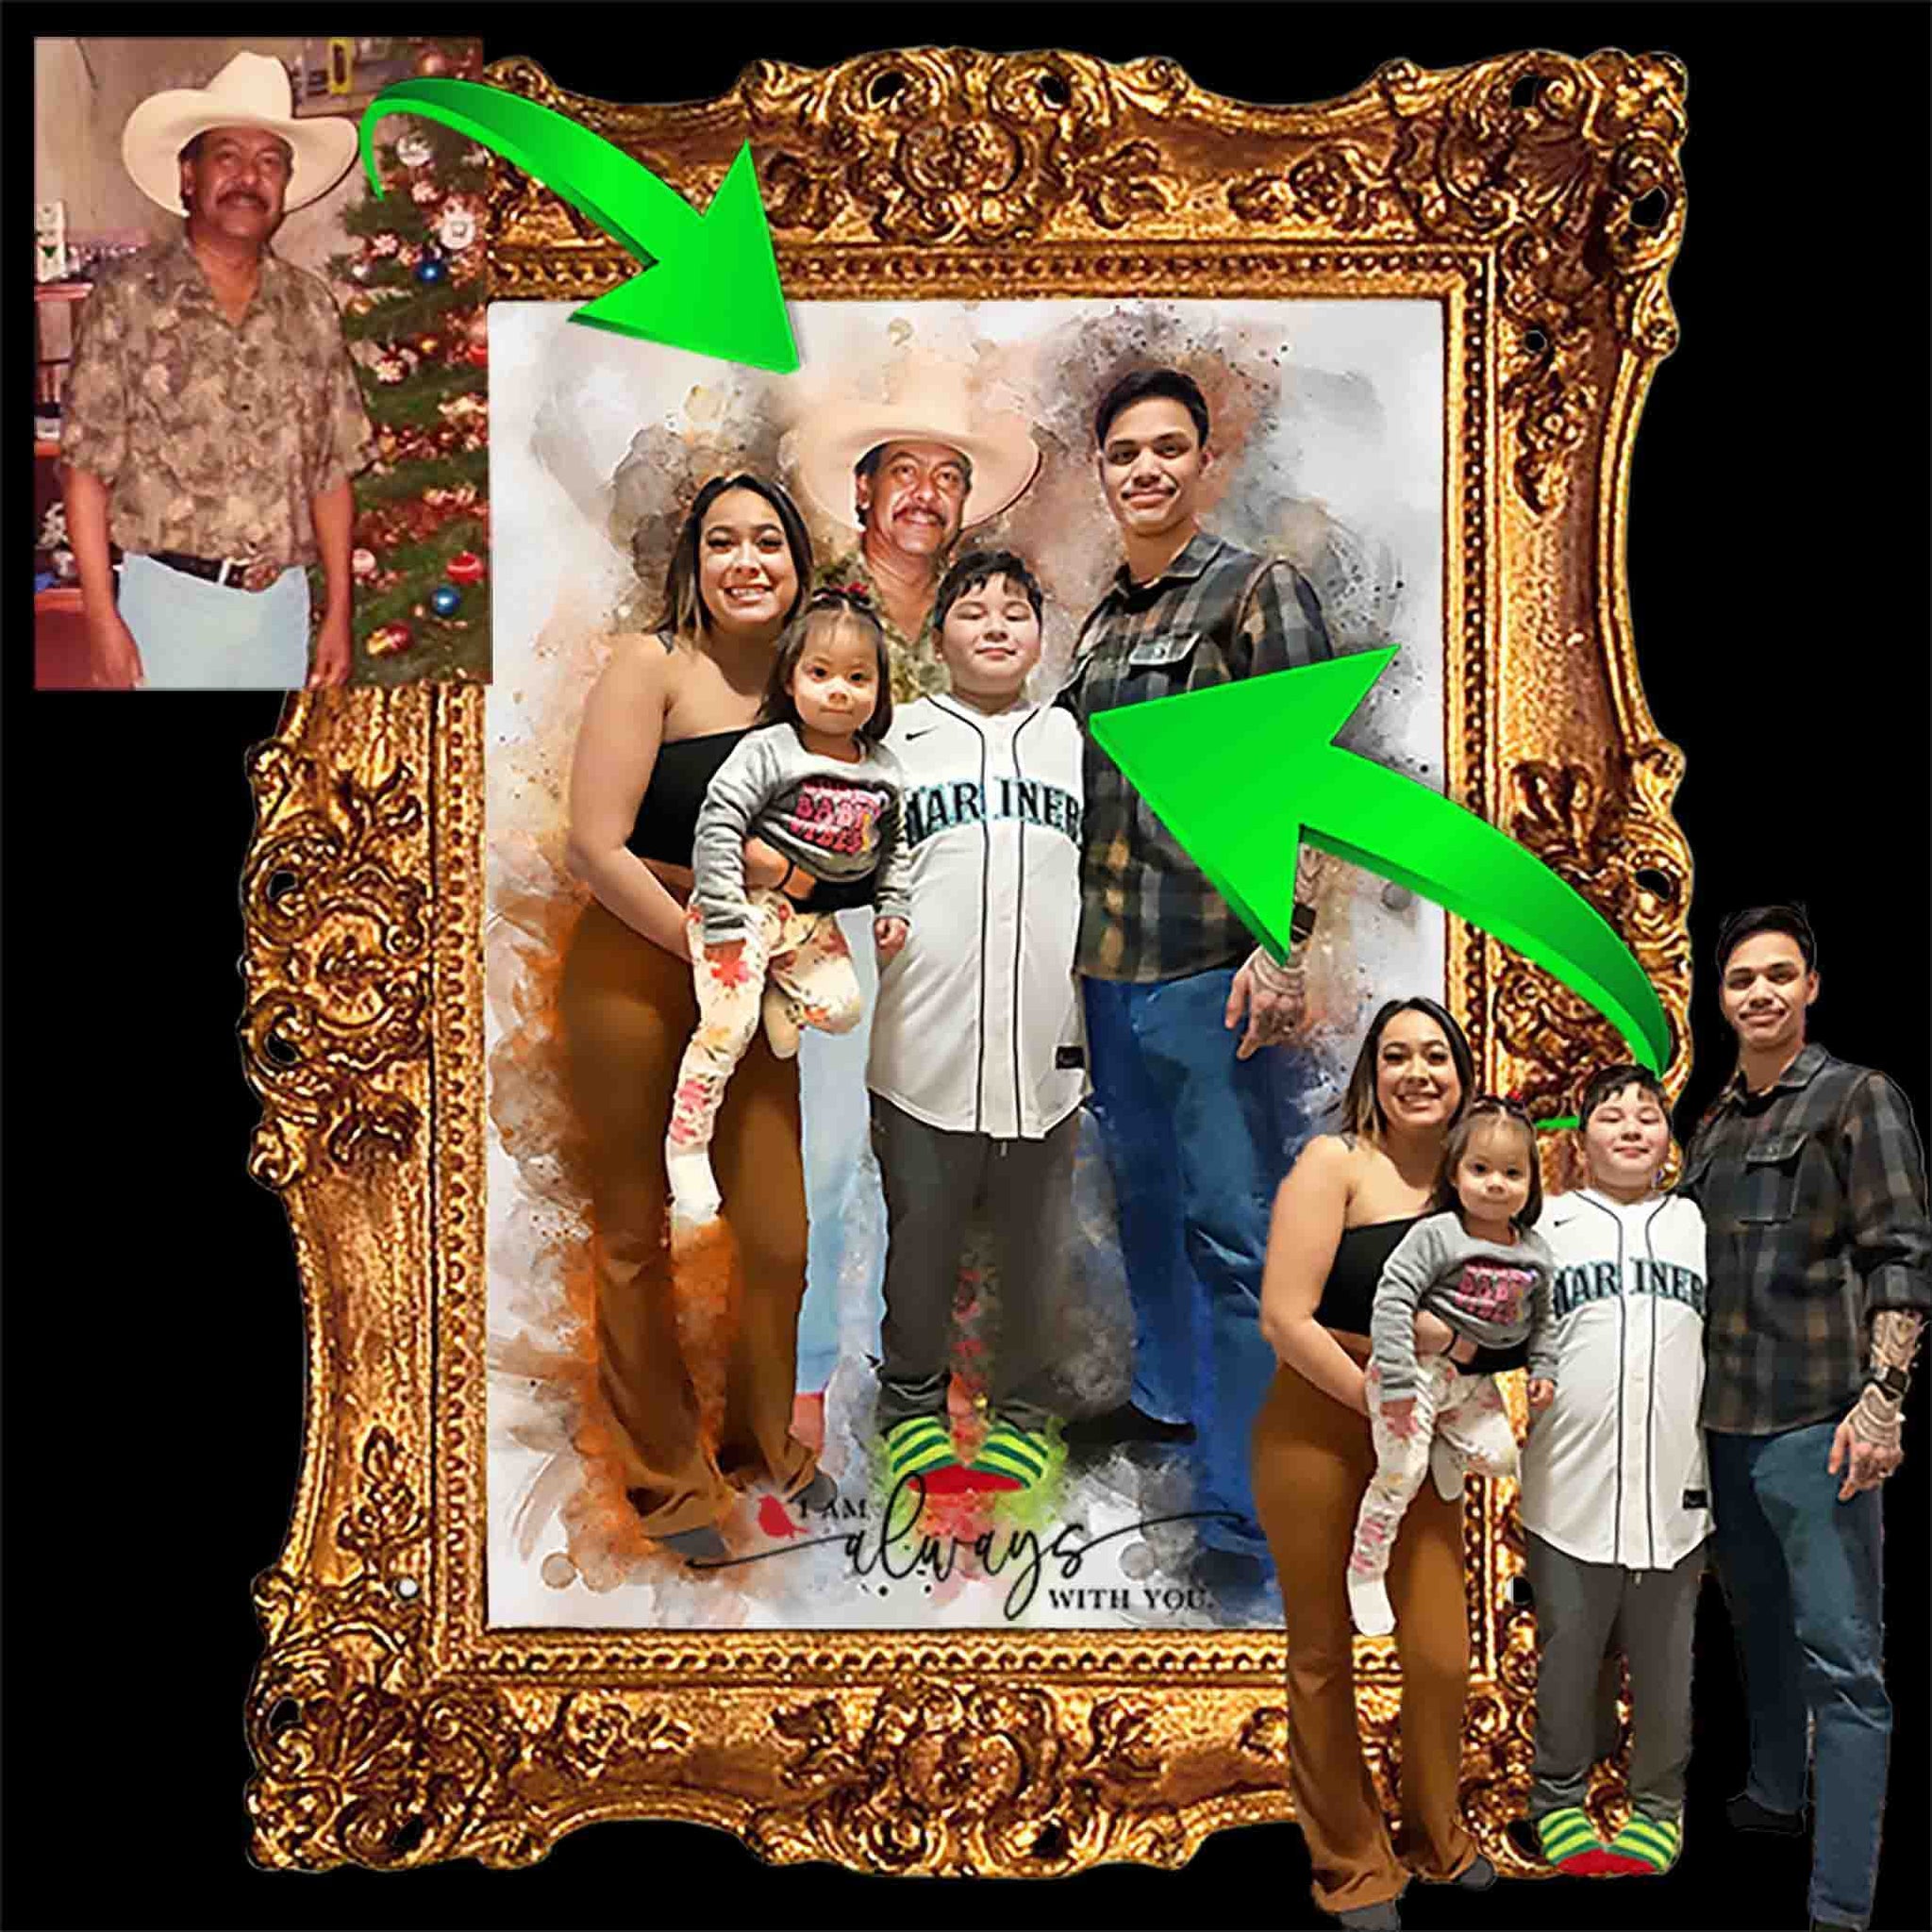 Add People to Photos, Add a Loved one to a Photo, Family Photo with Deceased - FromPicToArt